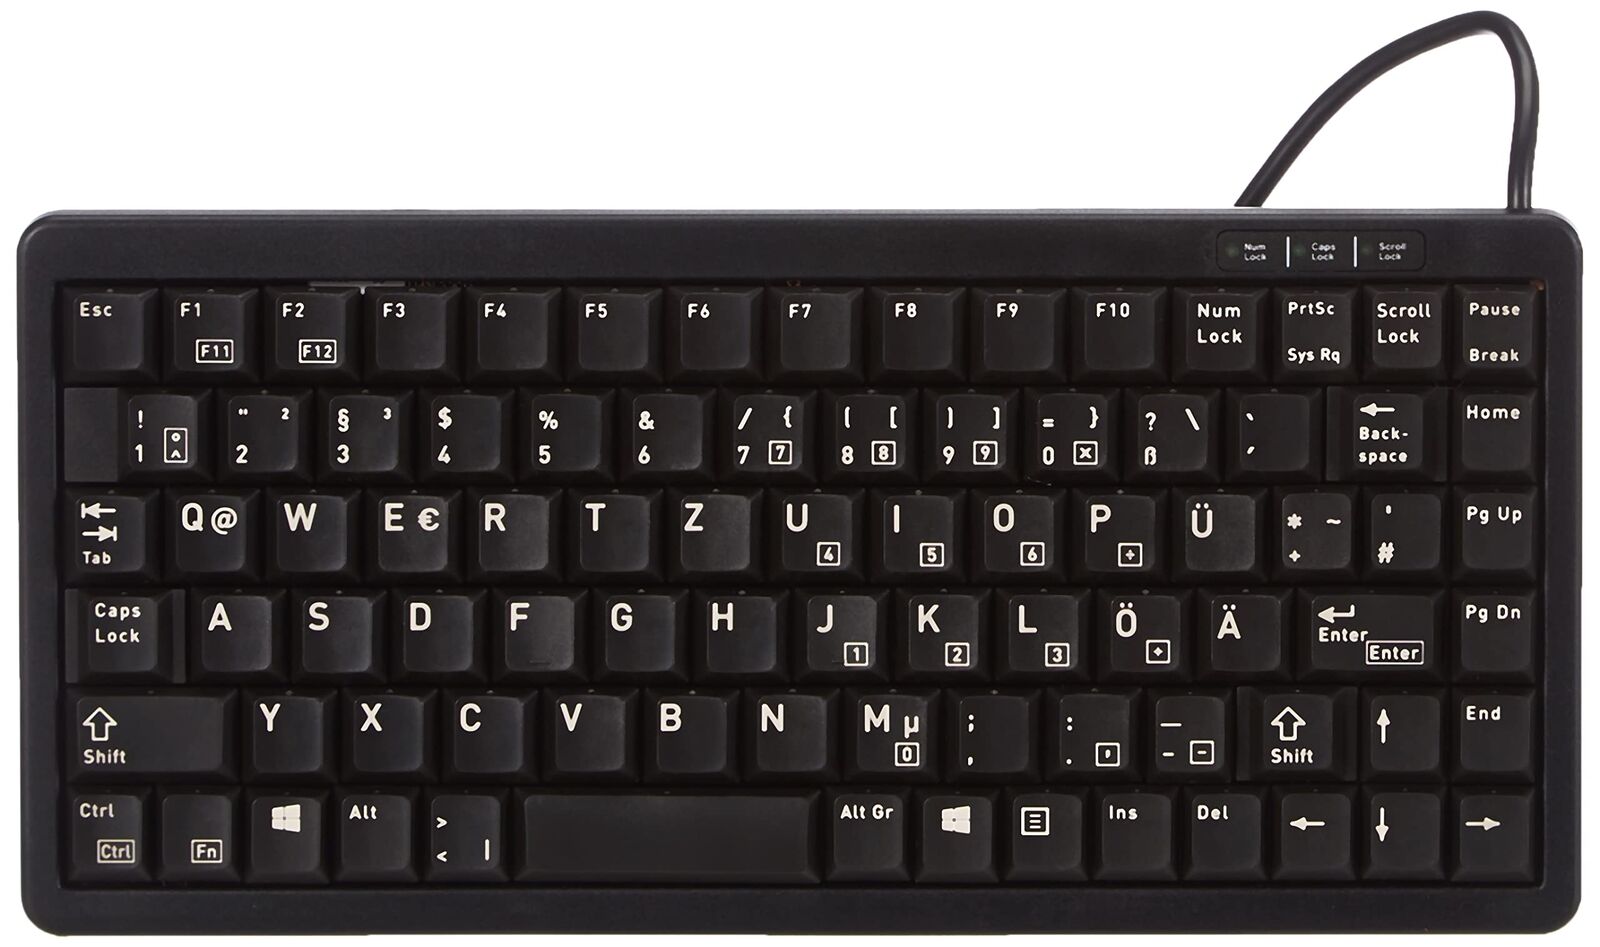 CHERRY USB/PS2 Wired Mini Compact Keyboard - Black (German Layout) German layout